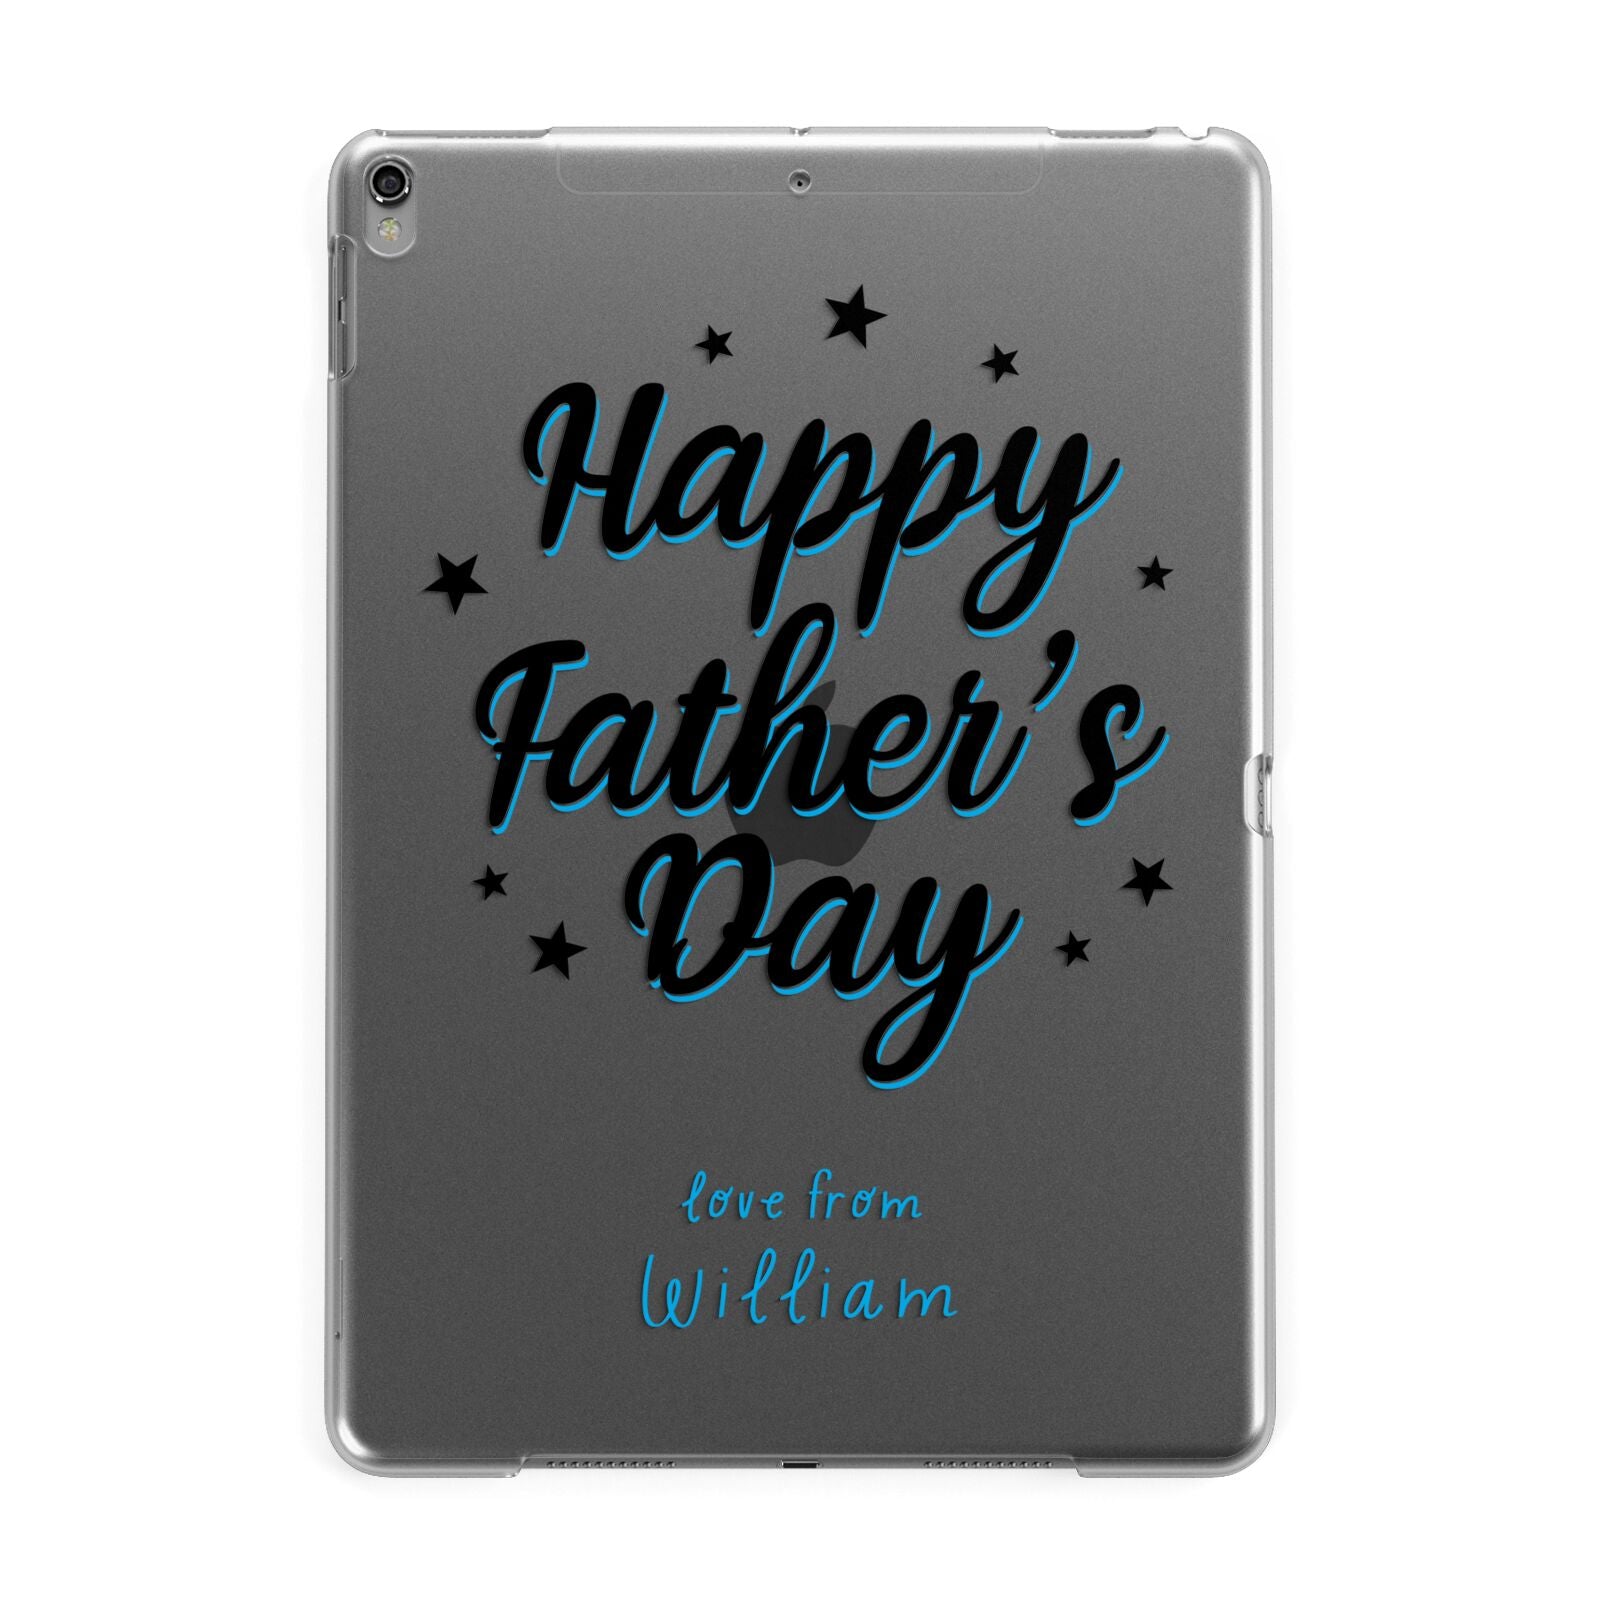 Fathers Day Apple iPad Grey Case